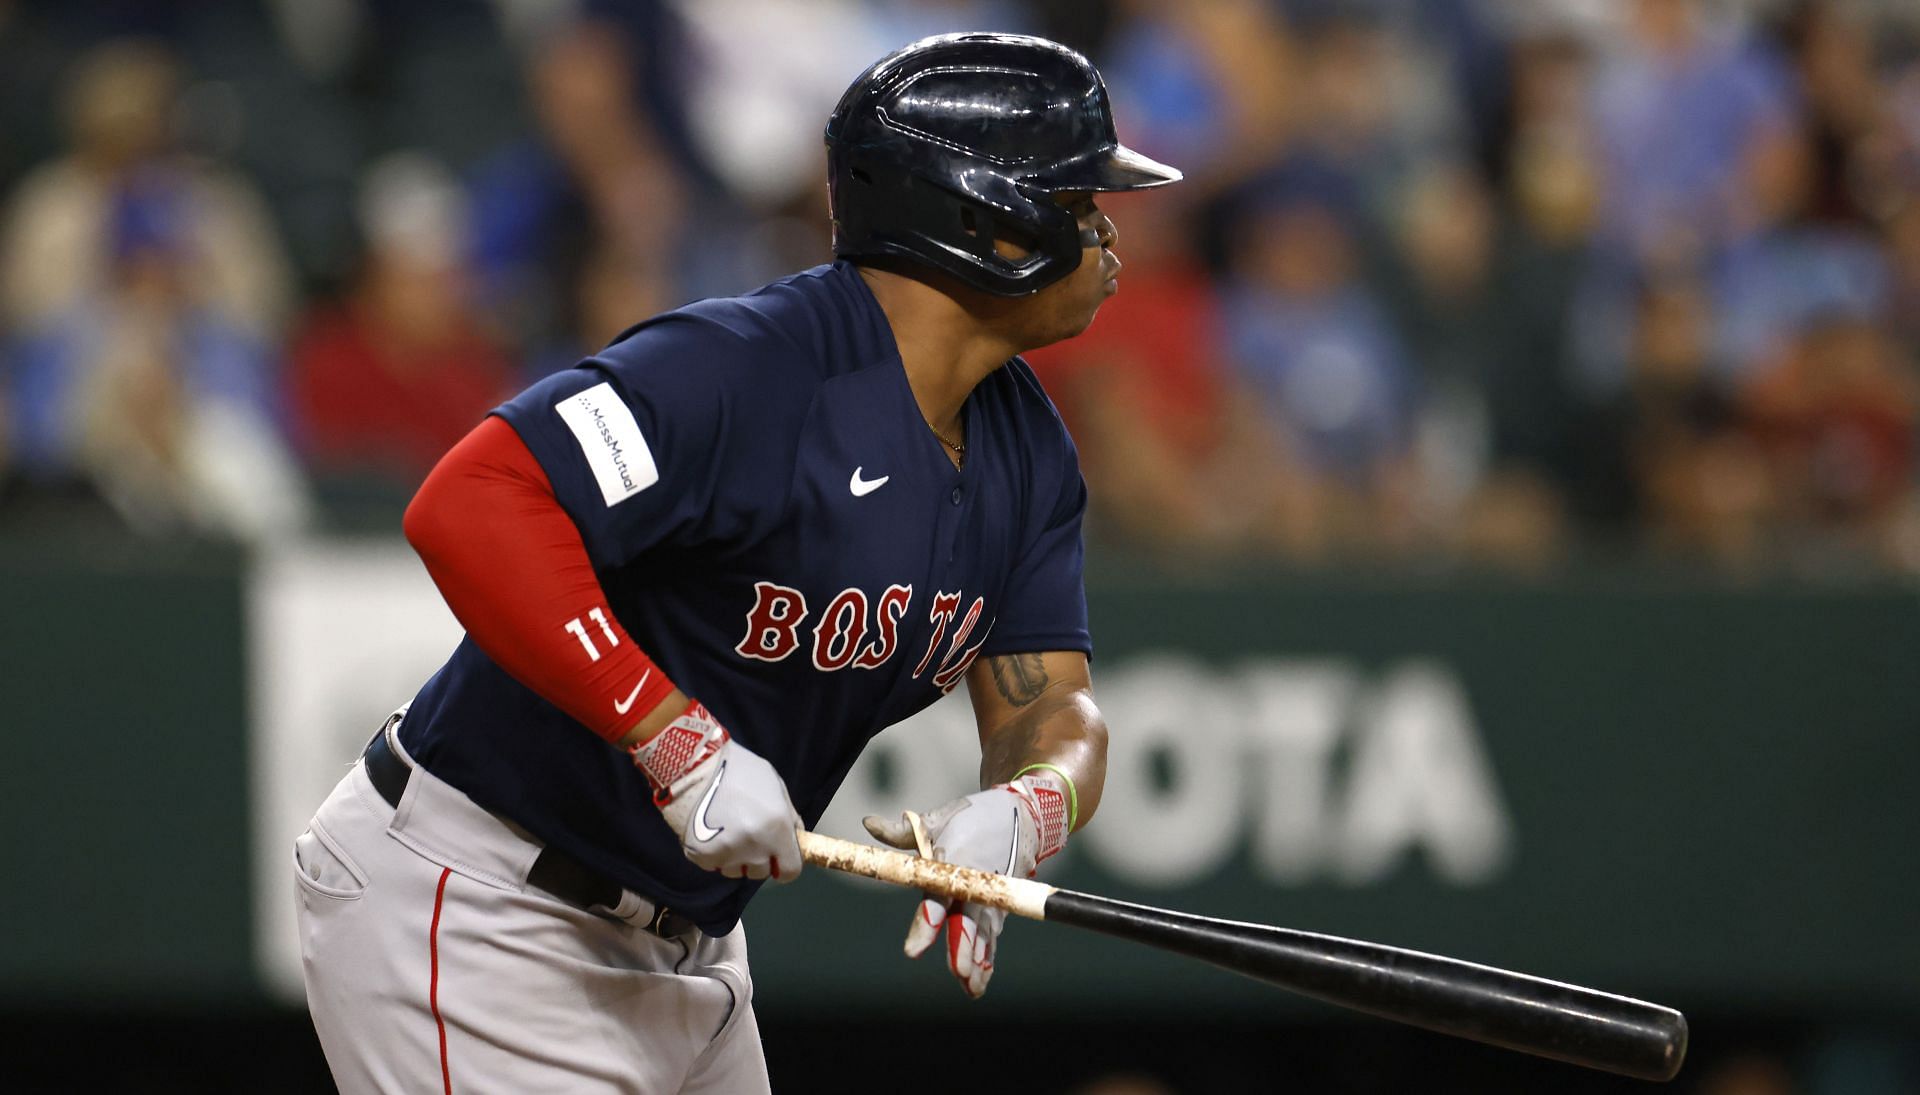 Devers&rsquo; $315.5 million deal is under scrutiny after a lackluster first year.